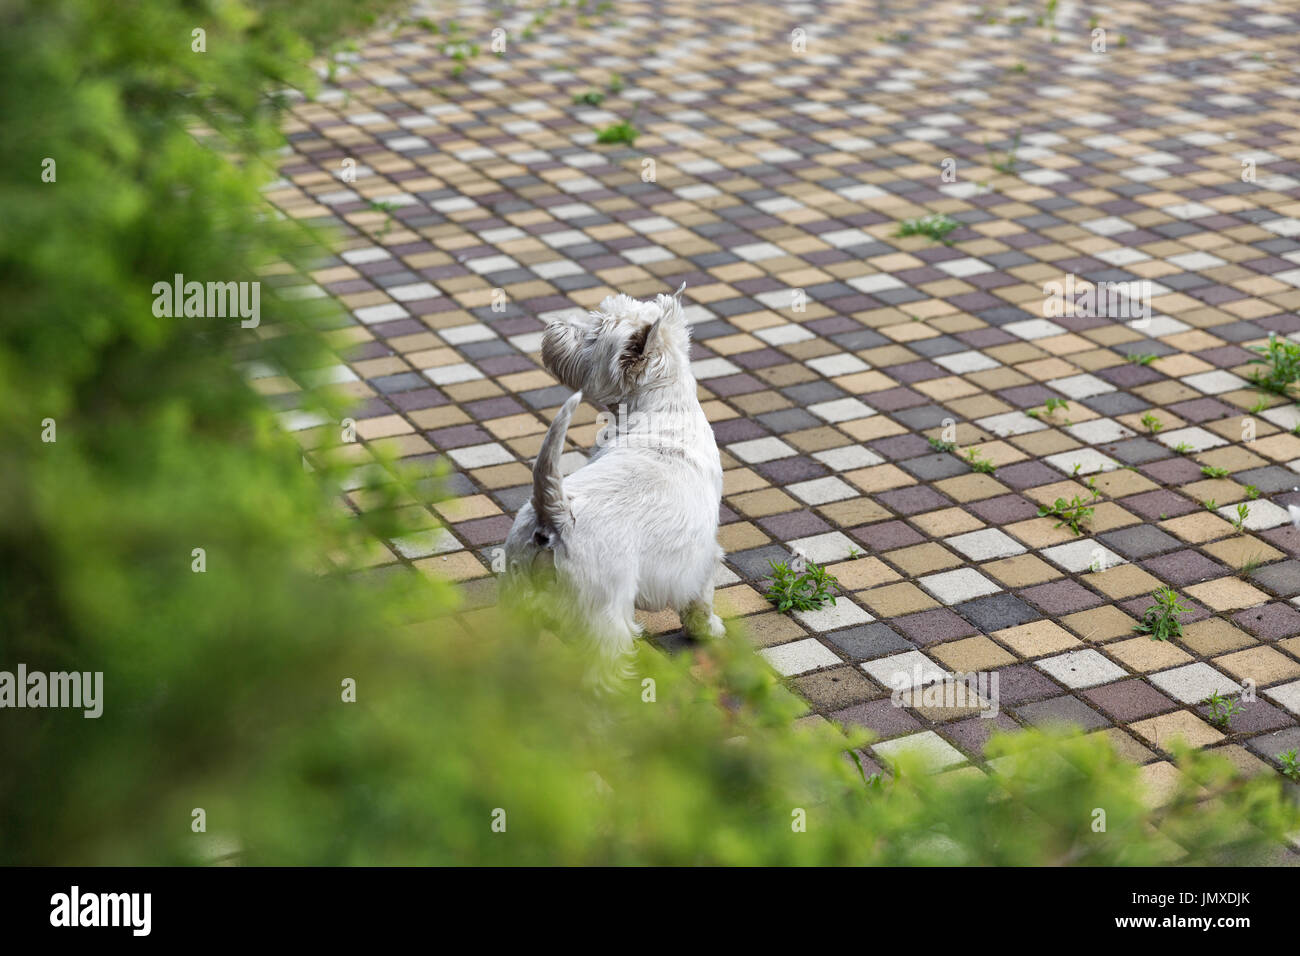 Westie dog on the paving tile. West Highland White Terrier, commonly known as the Westie, a breed of dog from Scotland. Stock Photo